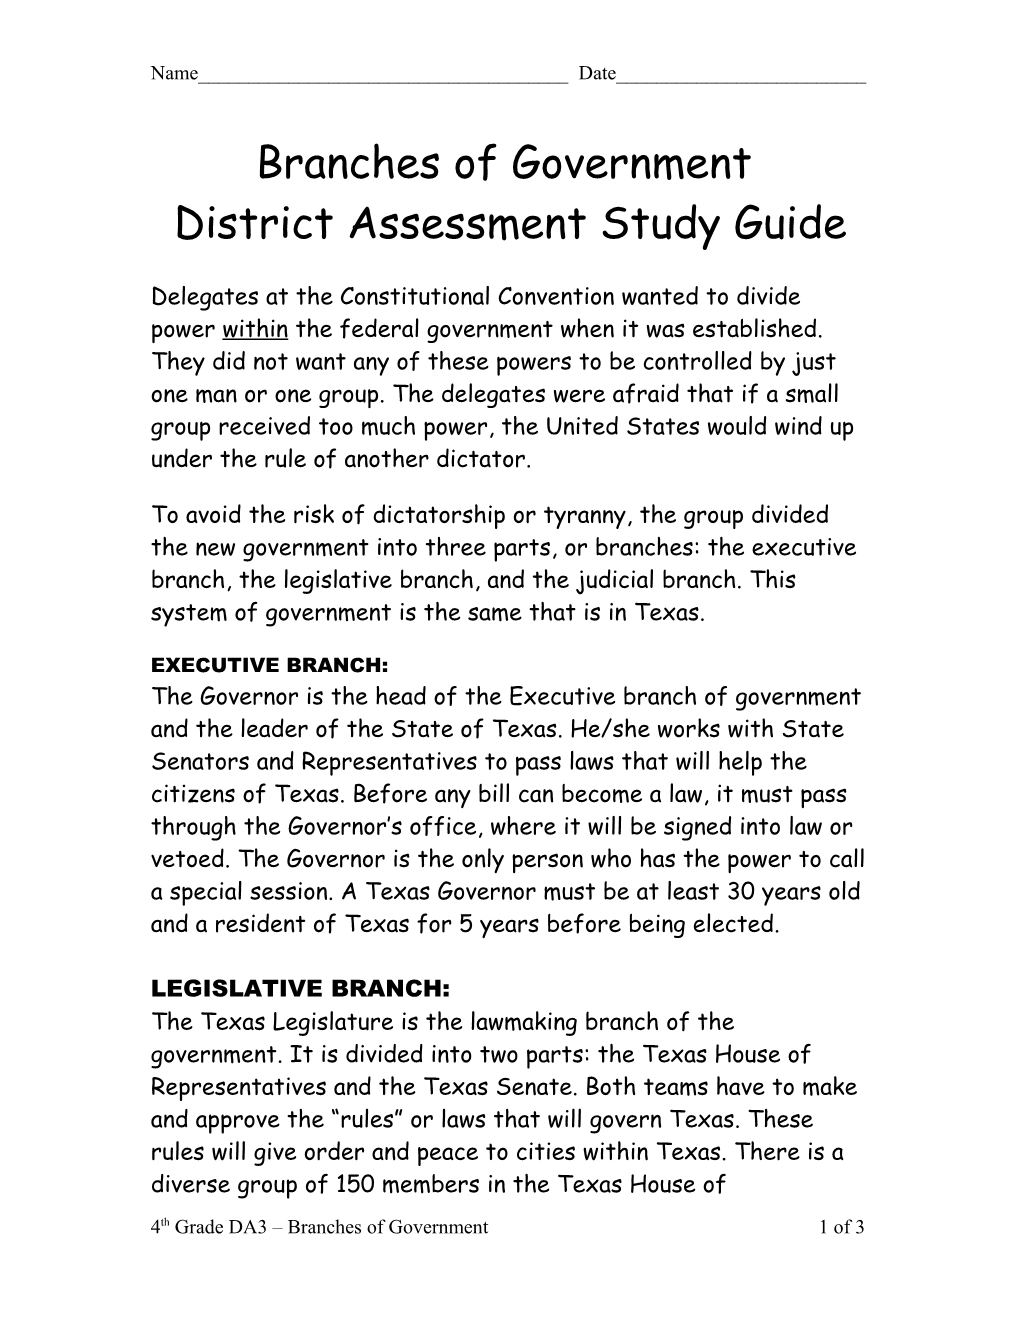 District Assessment Study Guide